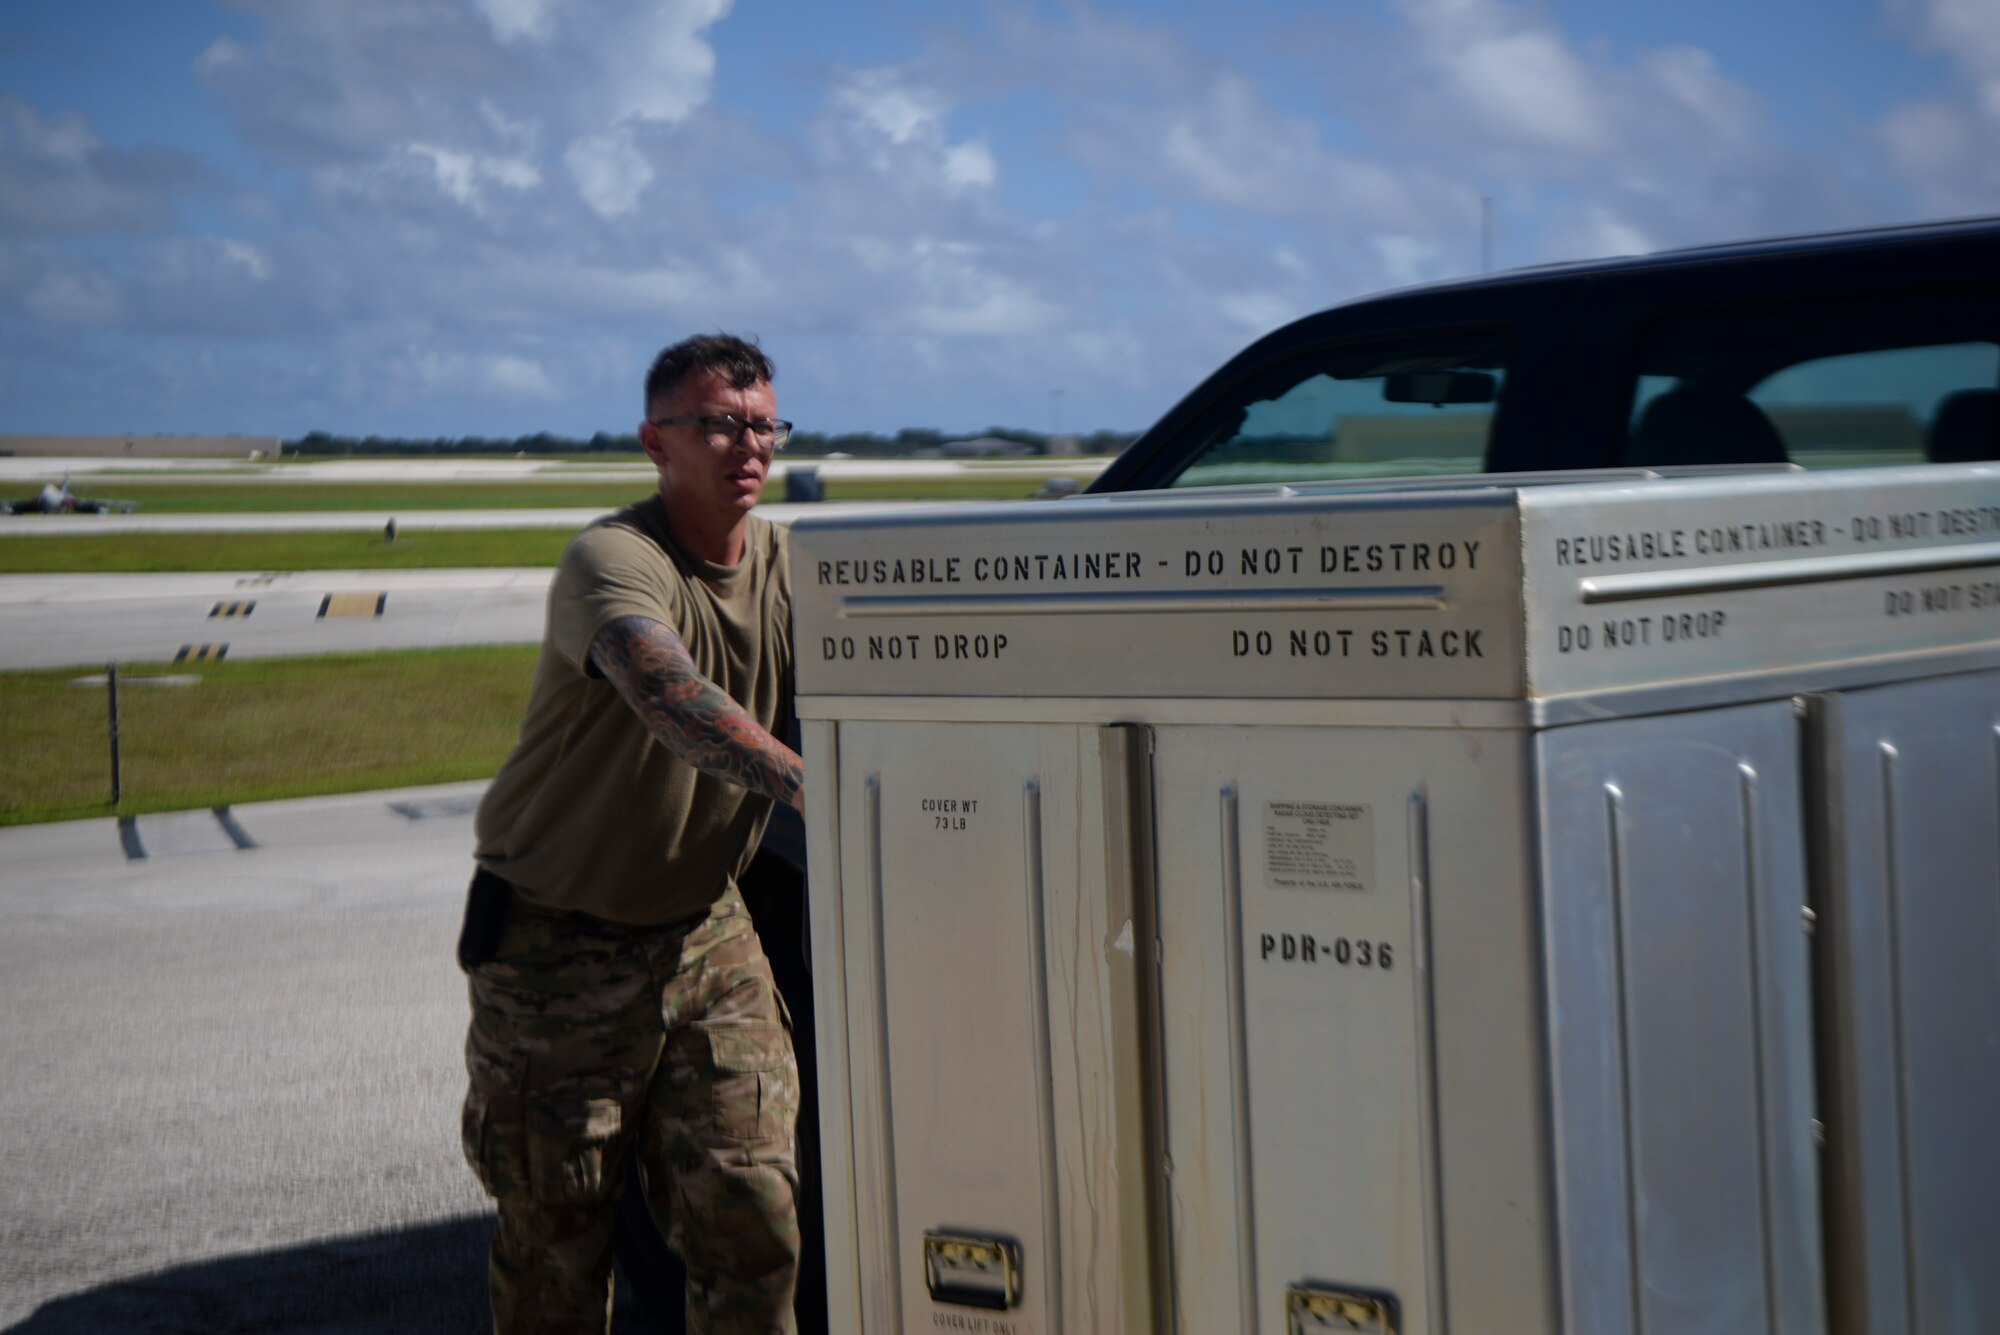 Airman pushes metal boxes full of equipment on a cart.